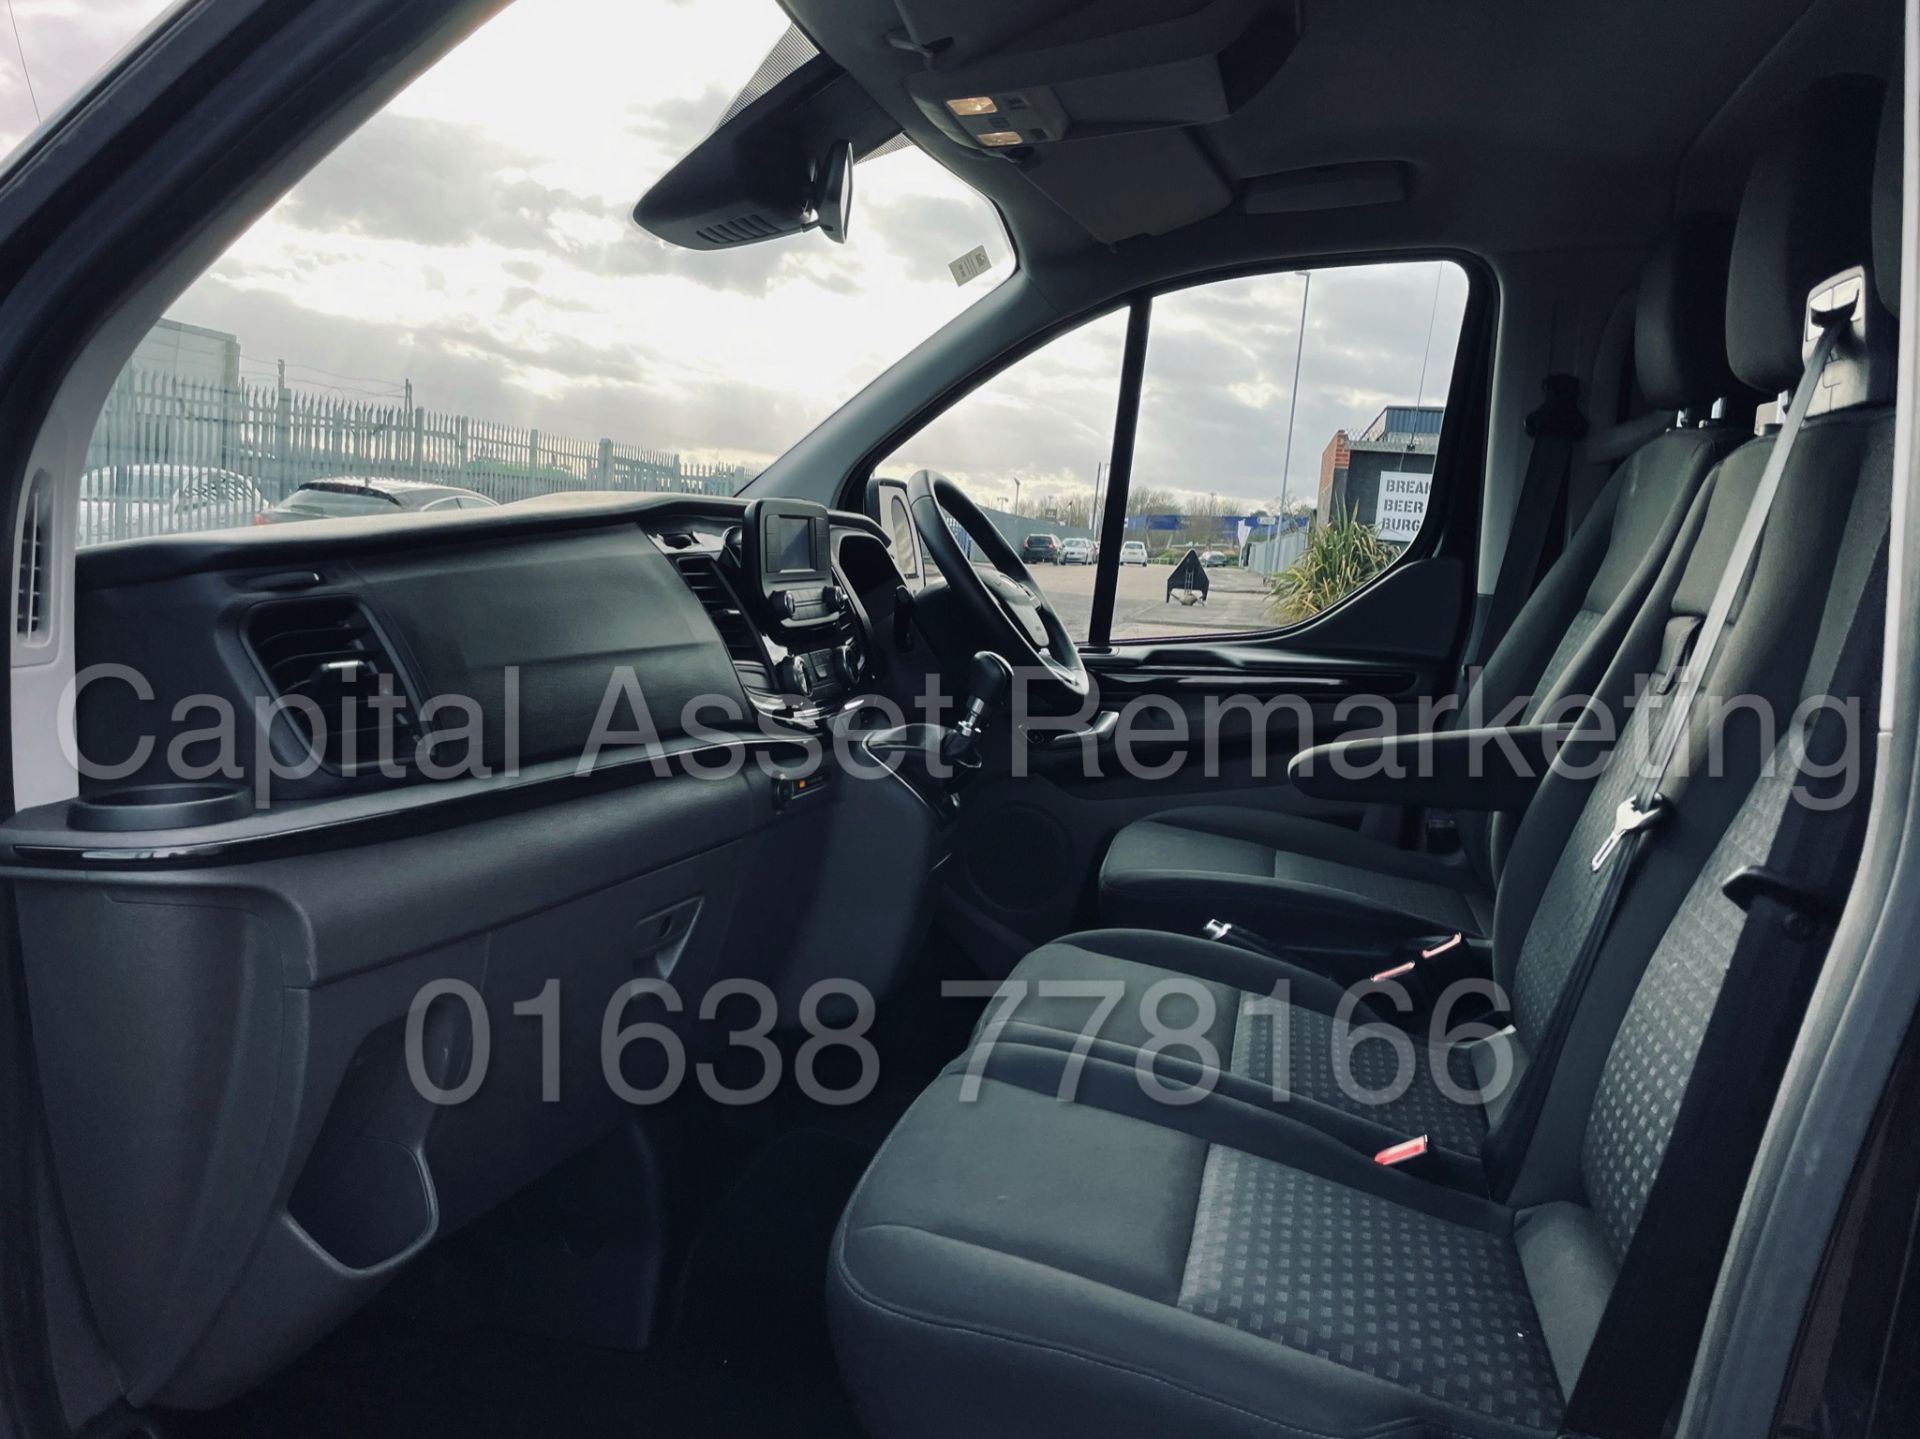 (On Sale) FORD TRANSIT CUSTOM TOURNEO *9 SEATER MPV / BUS* (2019) '2.0 TDCI - 130 BHP' (1 OWNER) - Image 20 of 46